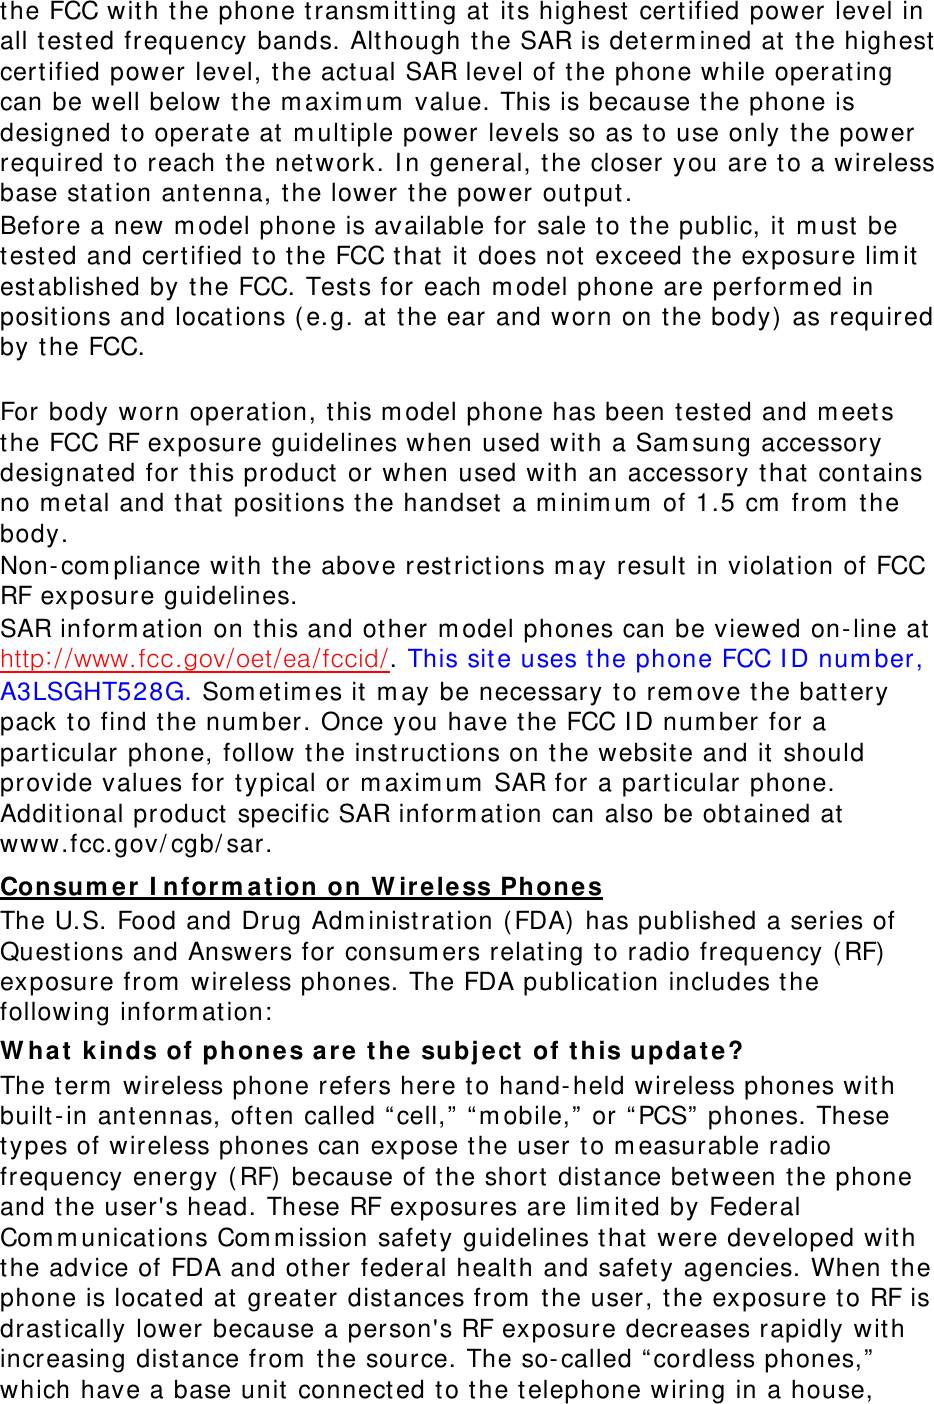 the FCC with t he phone t ransm itt ing at  its highest  certified power level in all t est ed frequency bands. Although t he SAR is det erm ined at the highest cert ified power level, t he act ual SAR level of t he phone while operating can be well below t he m axim um  value. This is because the phone is designed t o operate at  m ult iple power levels so as to use only t he power required to reach t he network. I n general, t he closer you are t o a wireless base stat ion ant enna, t he lower the power out put. Before a new m odel phone is available for sale t o t he public, it  m ust be test ed and cert ified to the FCC that it does not exceed t he exposure lim it  est ablished by the FCC. Test s for each m odel phone are perform ed in positions and locations ( e.g. at  the ear and worn on t he body)  as required by t he FCC.      For body worn operation, t his m odel phone has been t est ed and m eet s the FCC RF exposure guidelines when used with a Sam sung accessory designated for t his product or when used with an accessory t hat  contains no m etal and t hat positions t he handset  a m inim um  of 1.5 cm  from  t he body.  Non- com pliance with the above rest rict ions m ay result  in violation of FCC RF exposure guidelines. SAR inform ation on this and ot her m odel phones can be viewed on- line at :. This site uses the phone FCC I D num ber, A3LSGHT528G. Som et im es it  m ay be necessary t o rem ove the batt ery pack t o find the num ber. Once you have t he FCC I D num ber for a part icular phone, follow t he instruct ions on t he website and it  should provide values for t ypical or m axim um  SAR for a part icular phone. Additional product specific SAR inform ation can also be obtained at www.fcc.gov/ cgb/ sar. Consum er  I nform a t ion on W ir eless Phones The U.S. Food and Drug Adm inist rat ion ( FDA)  has published a series of Quest ions and Answers for consum ers relating to radio frequency ( RF)  exposure from  wireless phones. The FDA publication includes t he following inform ation:  W hat kinds of phones a re t he  subj e ct  of t his upda t e? The t erm  wireless phone refers here t o hand- held wireless phones with built-in ant ennas, often called “ cell,”  “ m obile,”  or “ PCS”  phones. These types of wireless phones can expose t he user to m easurable radio frequency energy ( RF)  because of the short  distance bet ween t he phone and t he user&apos;s head. These RF exposures are lim ited by Federal Com m unicat ions Com m ission safet y guidelines t hat were developed with the advice of FDA and ot her federal health and safet y agencies. When t he phone is located at greater dist ances from  the user, the exposure t o RF is drast ically lower because a person&apos;s RF exposure decreases rapidly wit h increasing distance from  the source. The so- called “ cordless phones,”  which have a base unit connect ed to the telephone wiring in a house, 